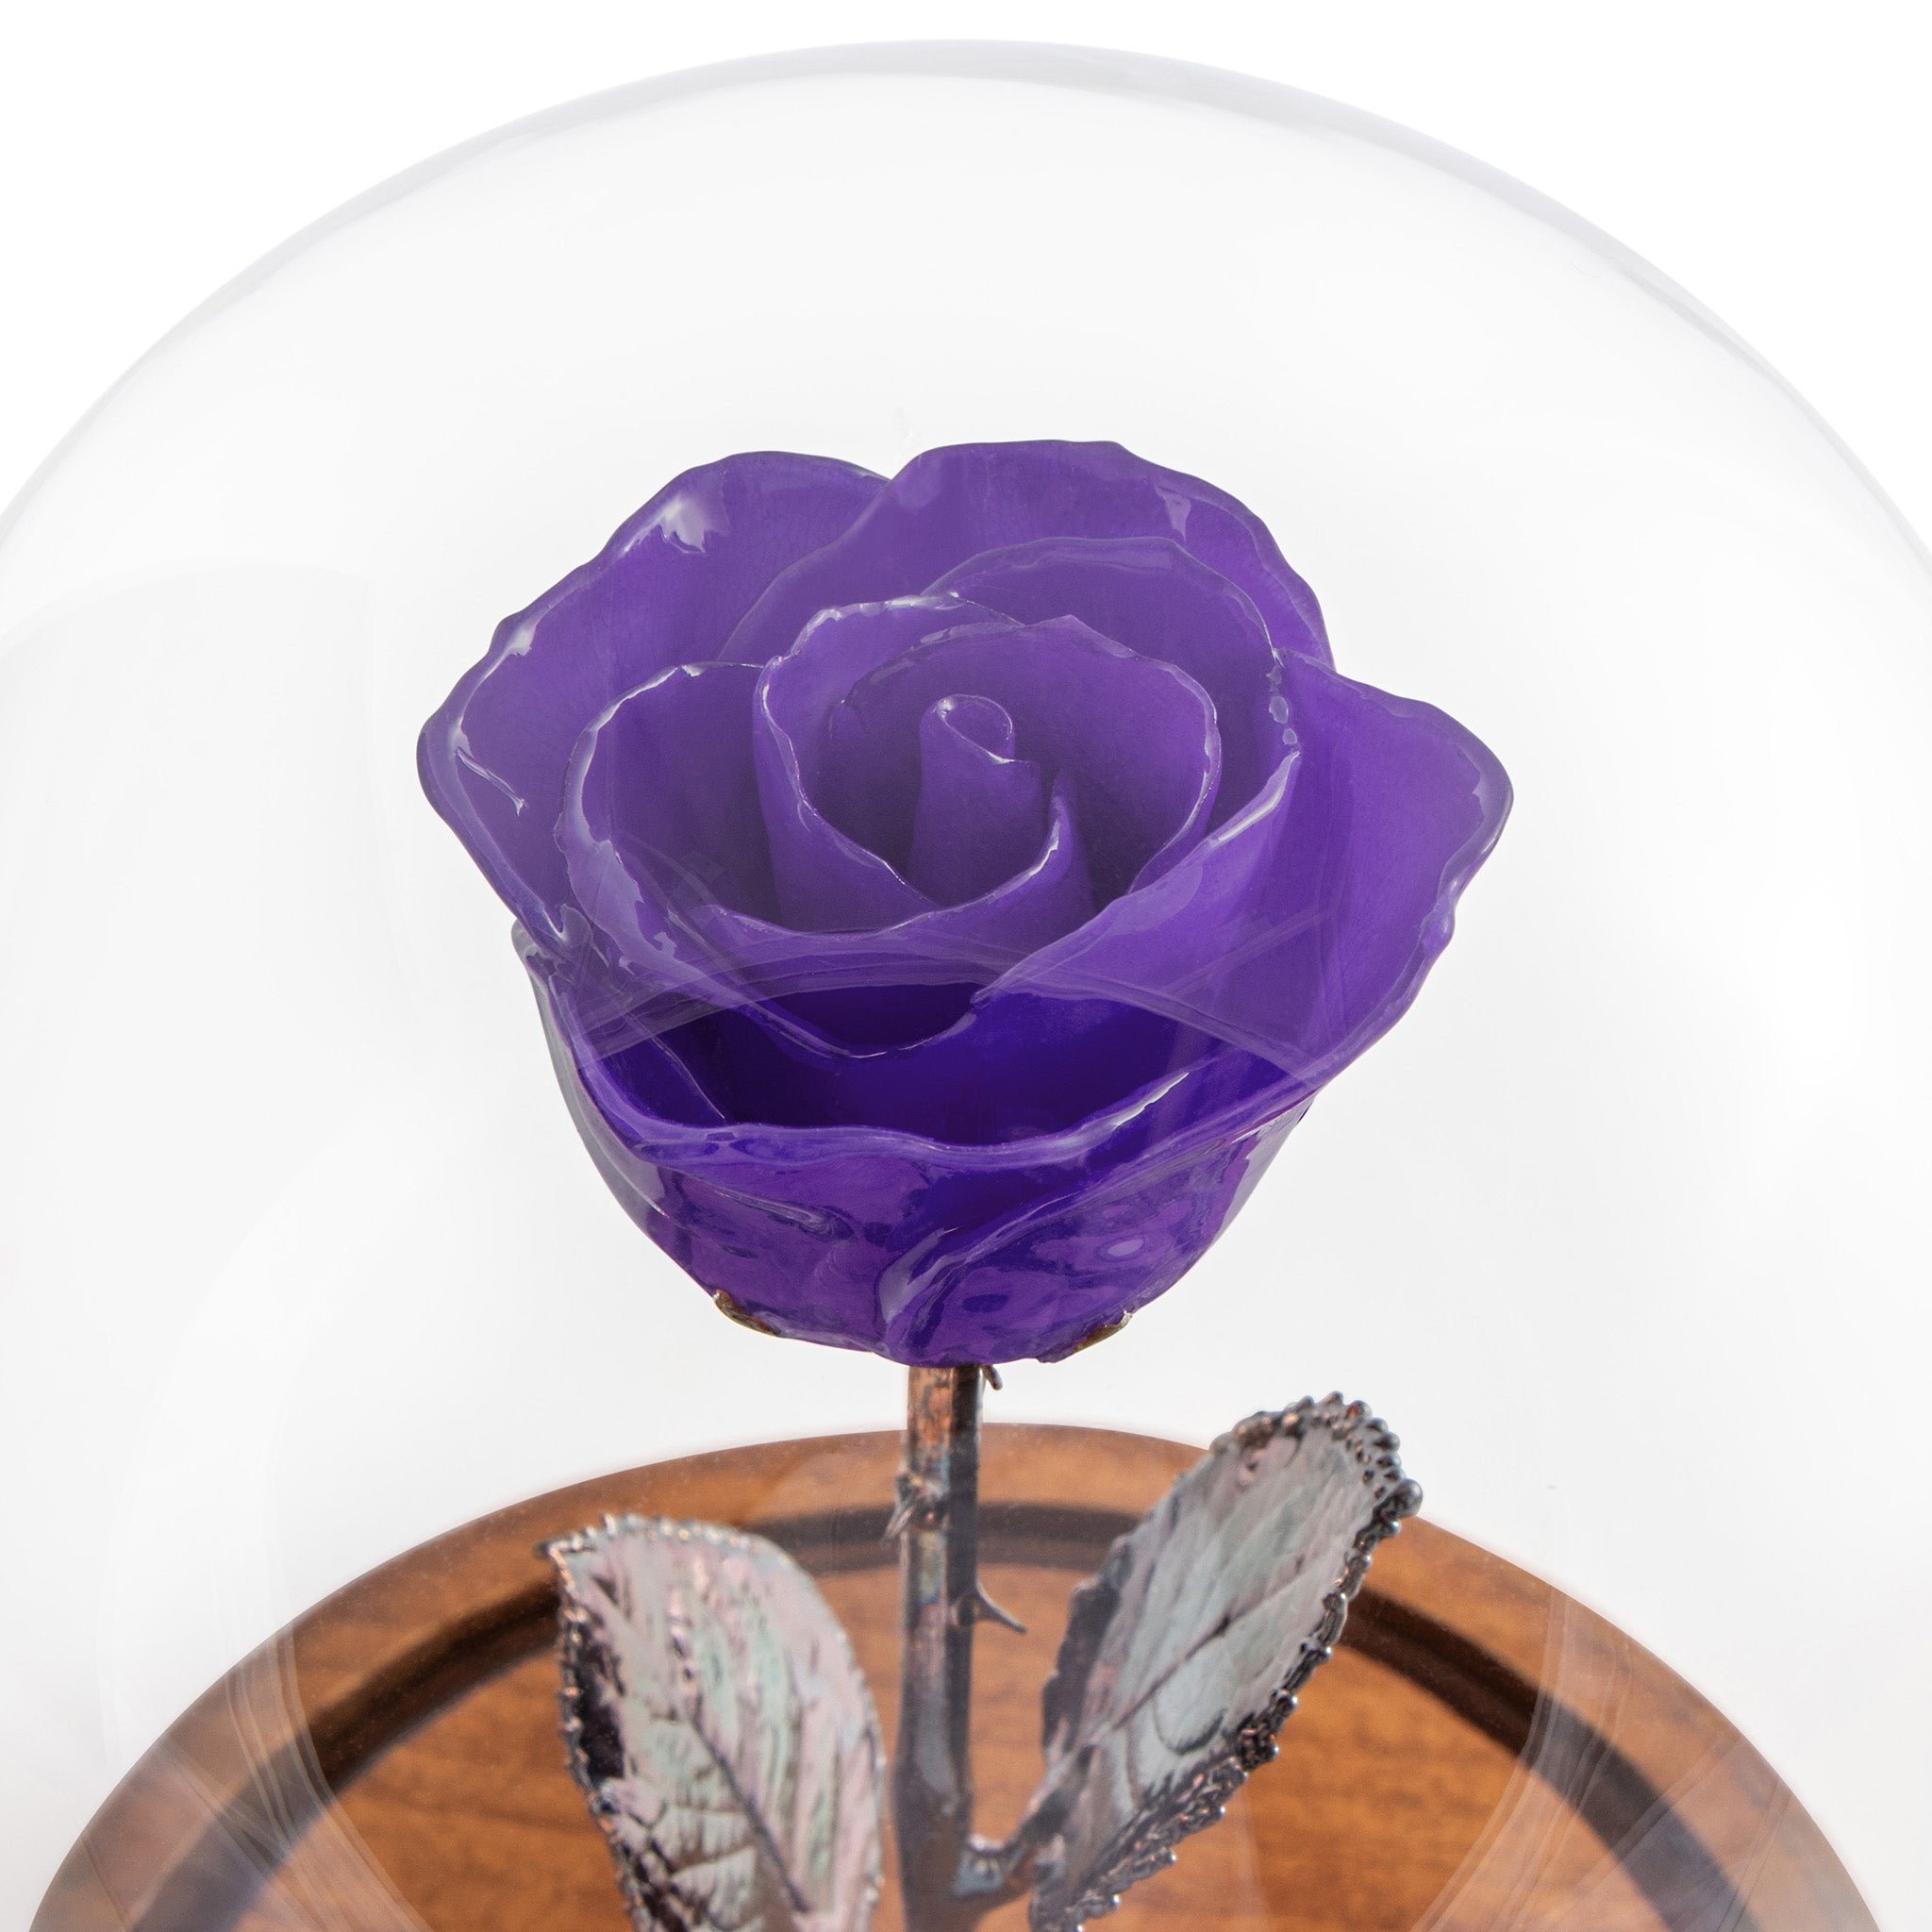 Purple Enchanted Rose (aka Beauty & The Beast Rose) with Patina Copper Stem Mounted to A Hand Turned Solid Wood Base under a glass dome. Zoomed in view of flower.